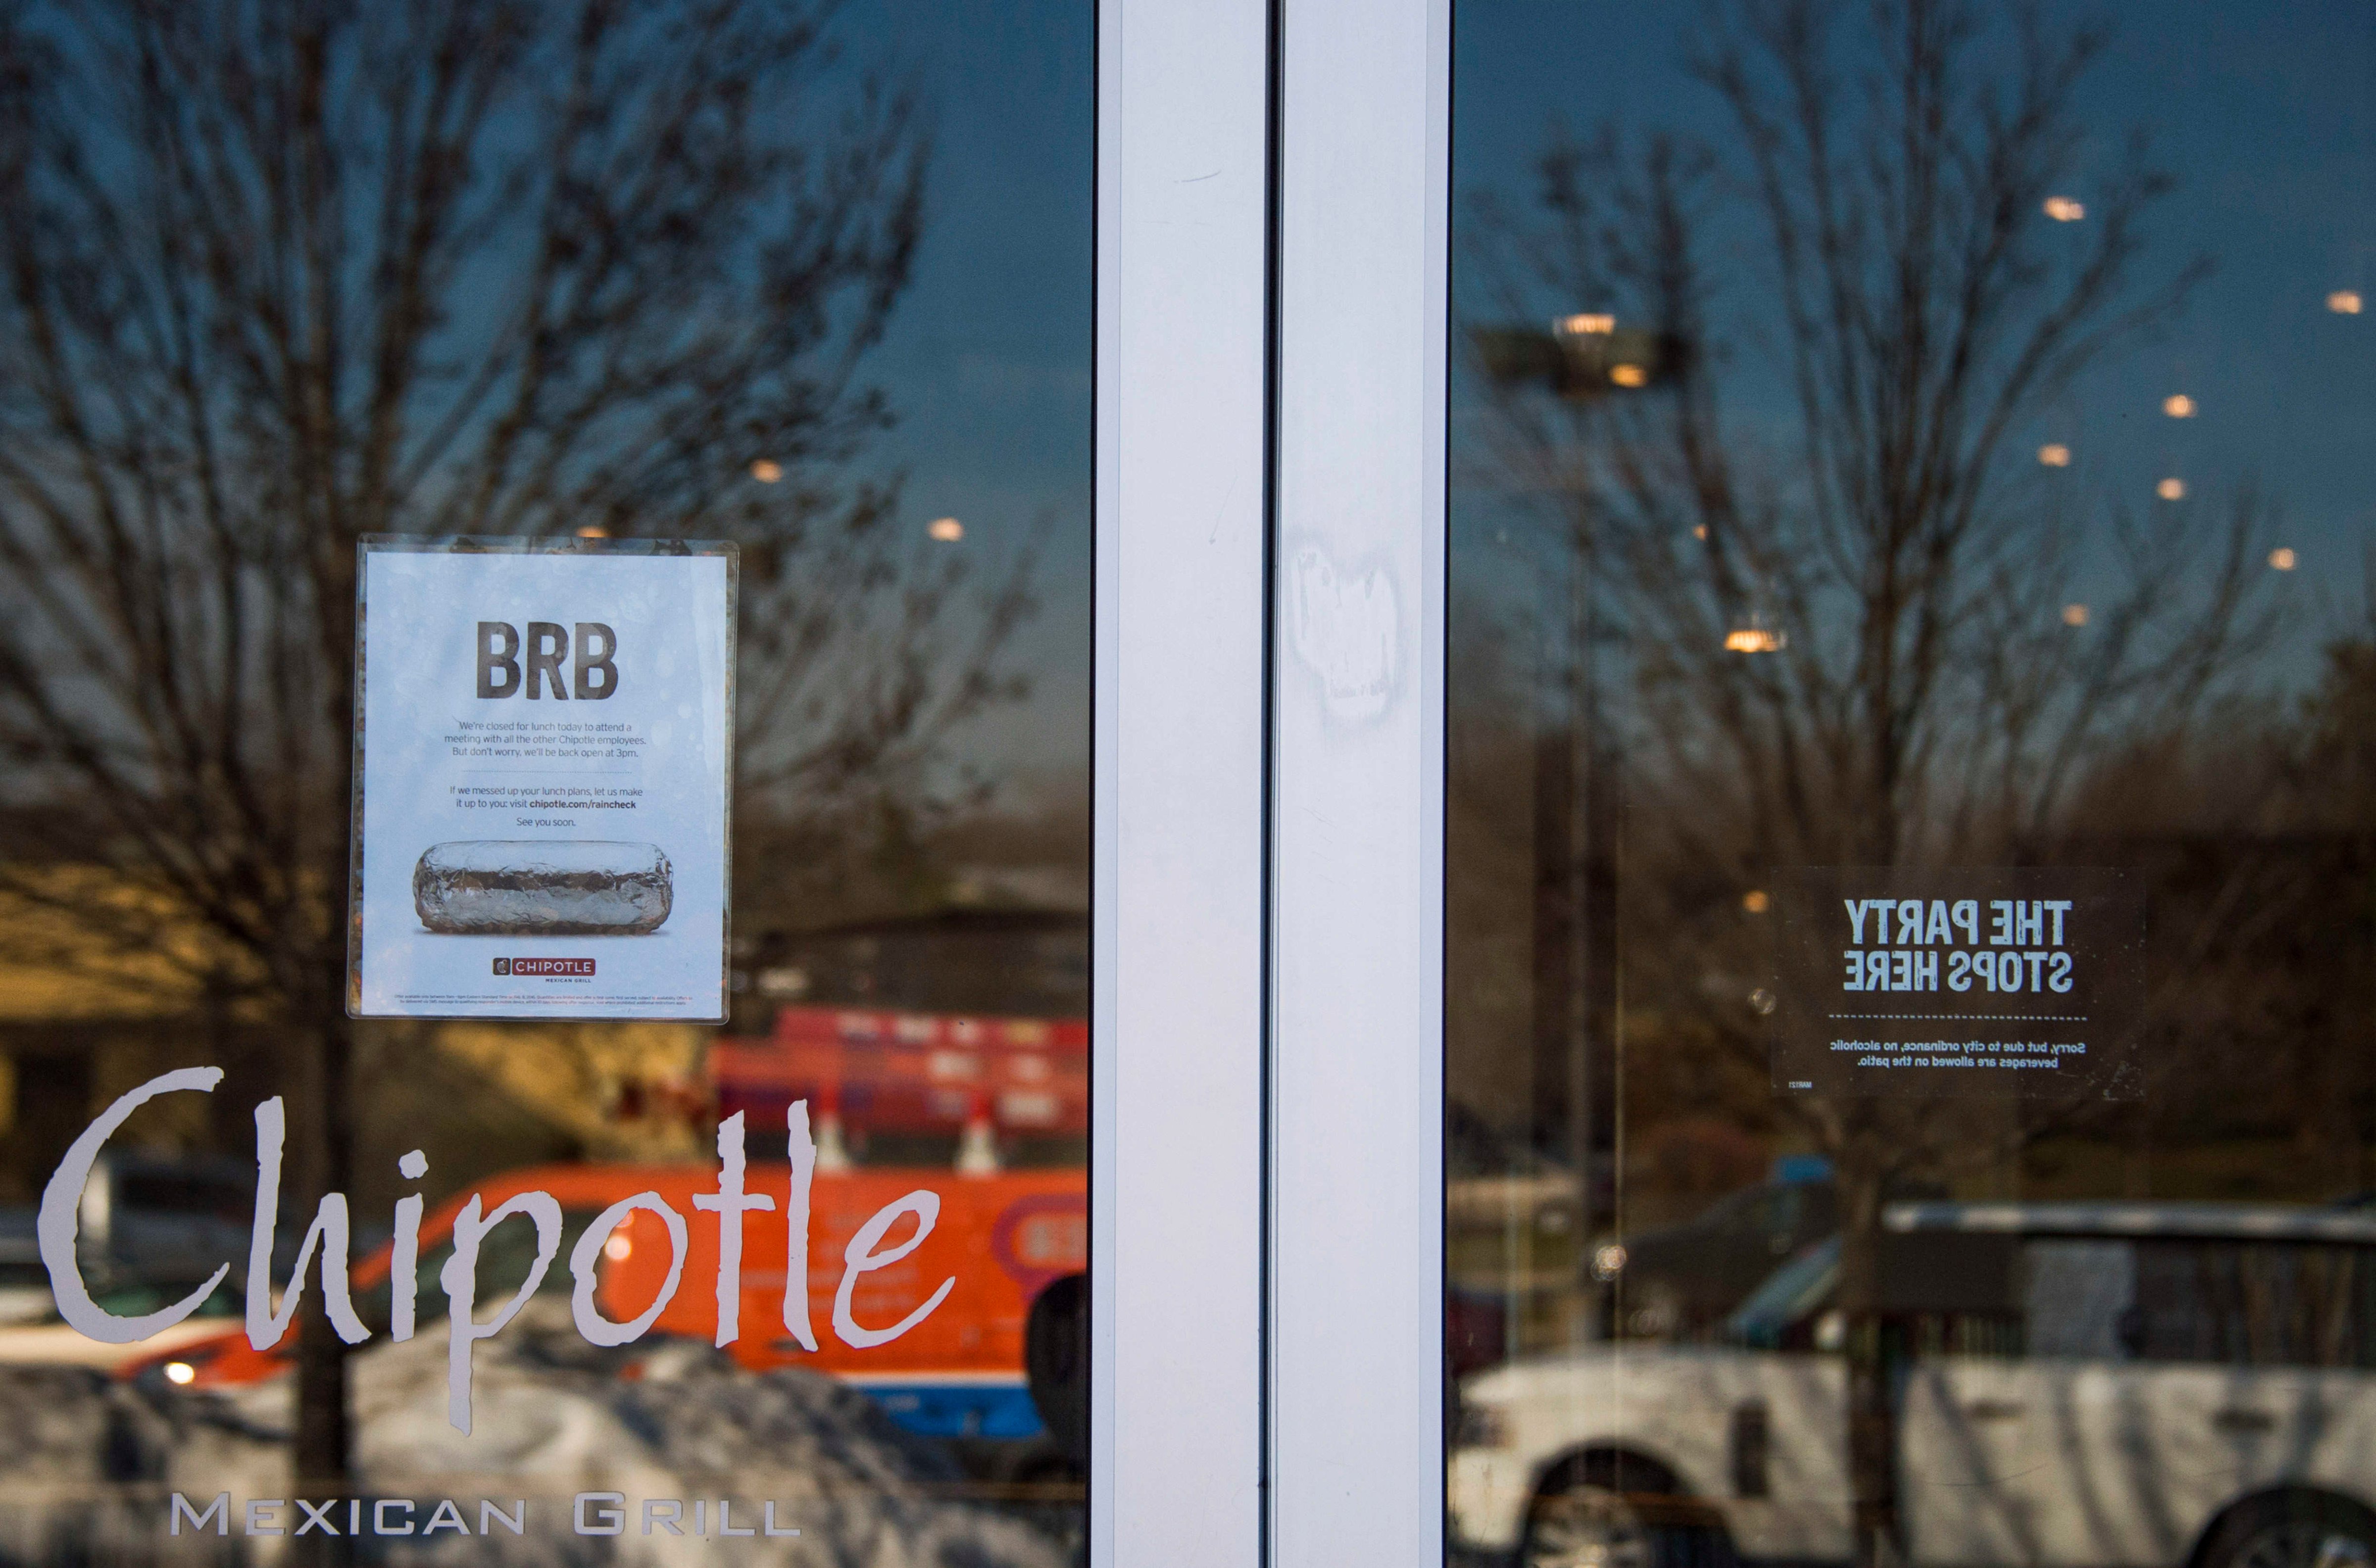 A sign is posted in the window of Chipotle Mexican Grill in Bowie, Maryland, advising customers they will be closed for a company wide meeting on February 8, 2016.